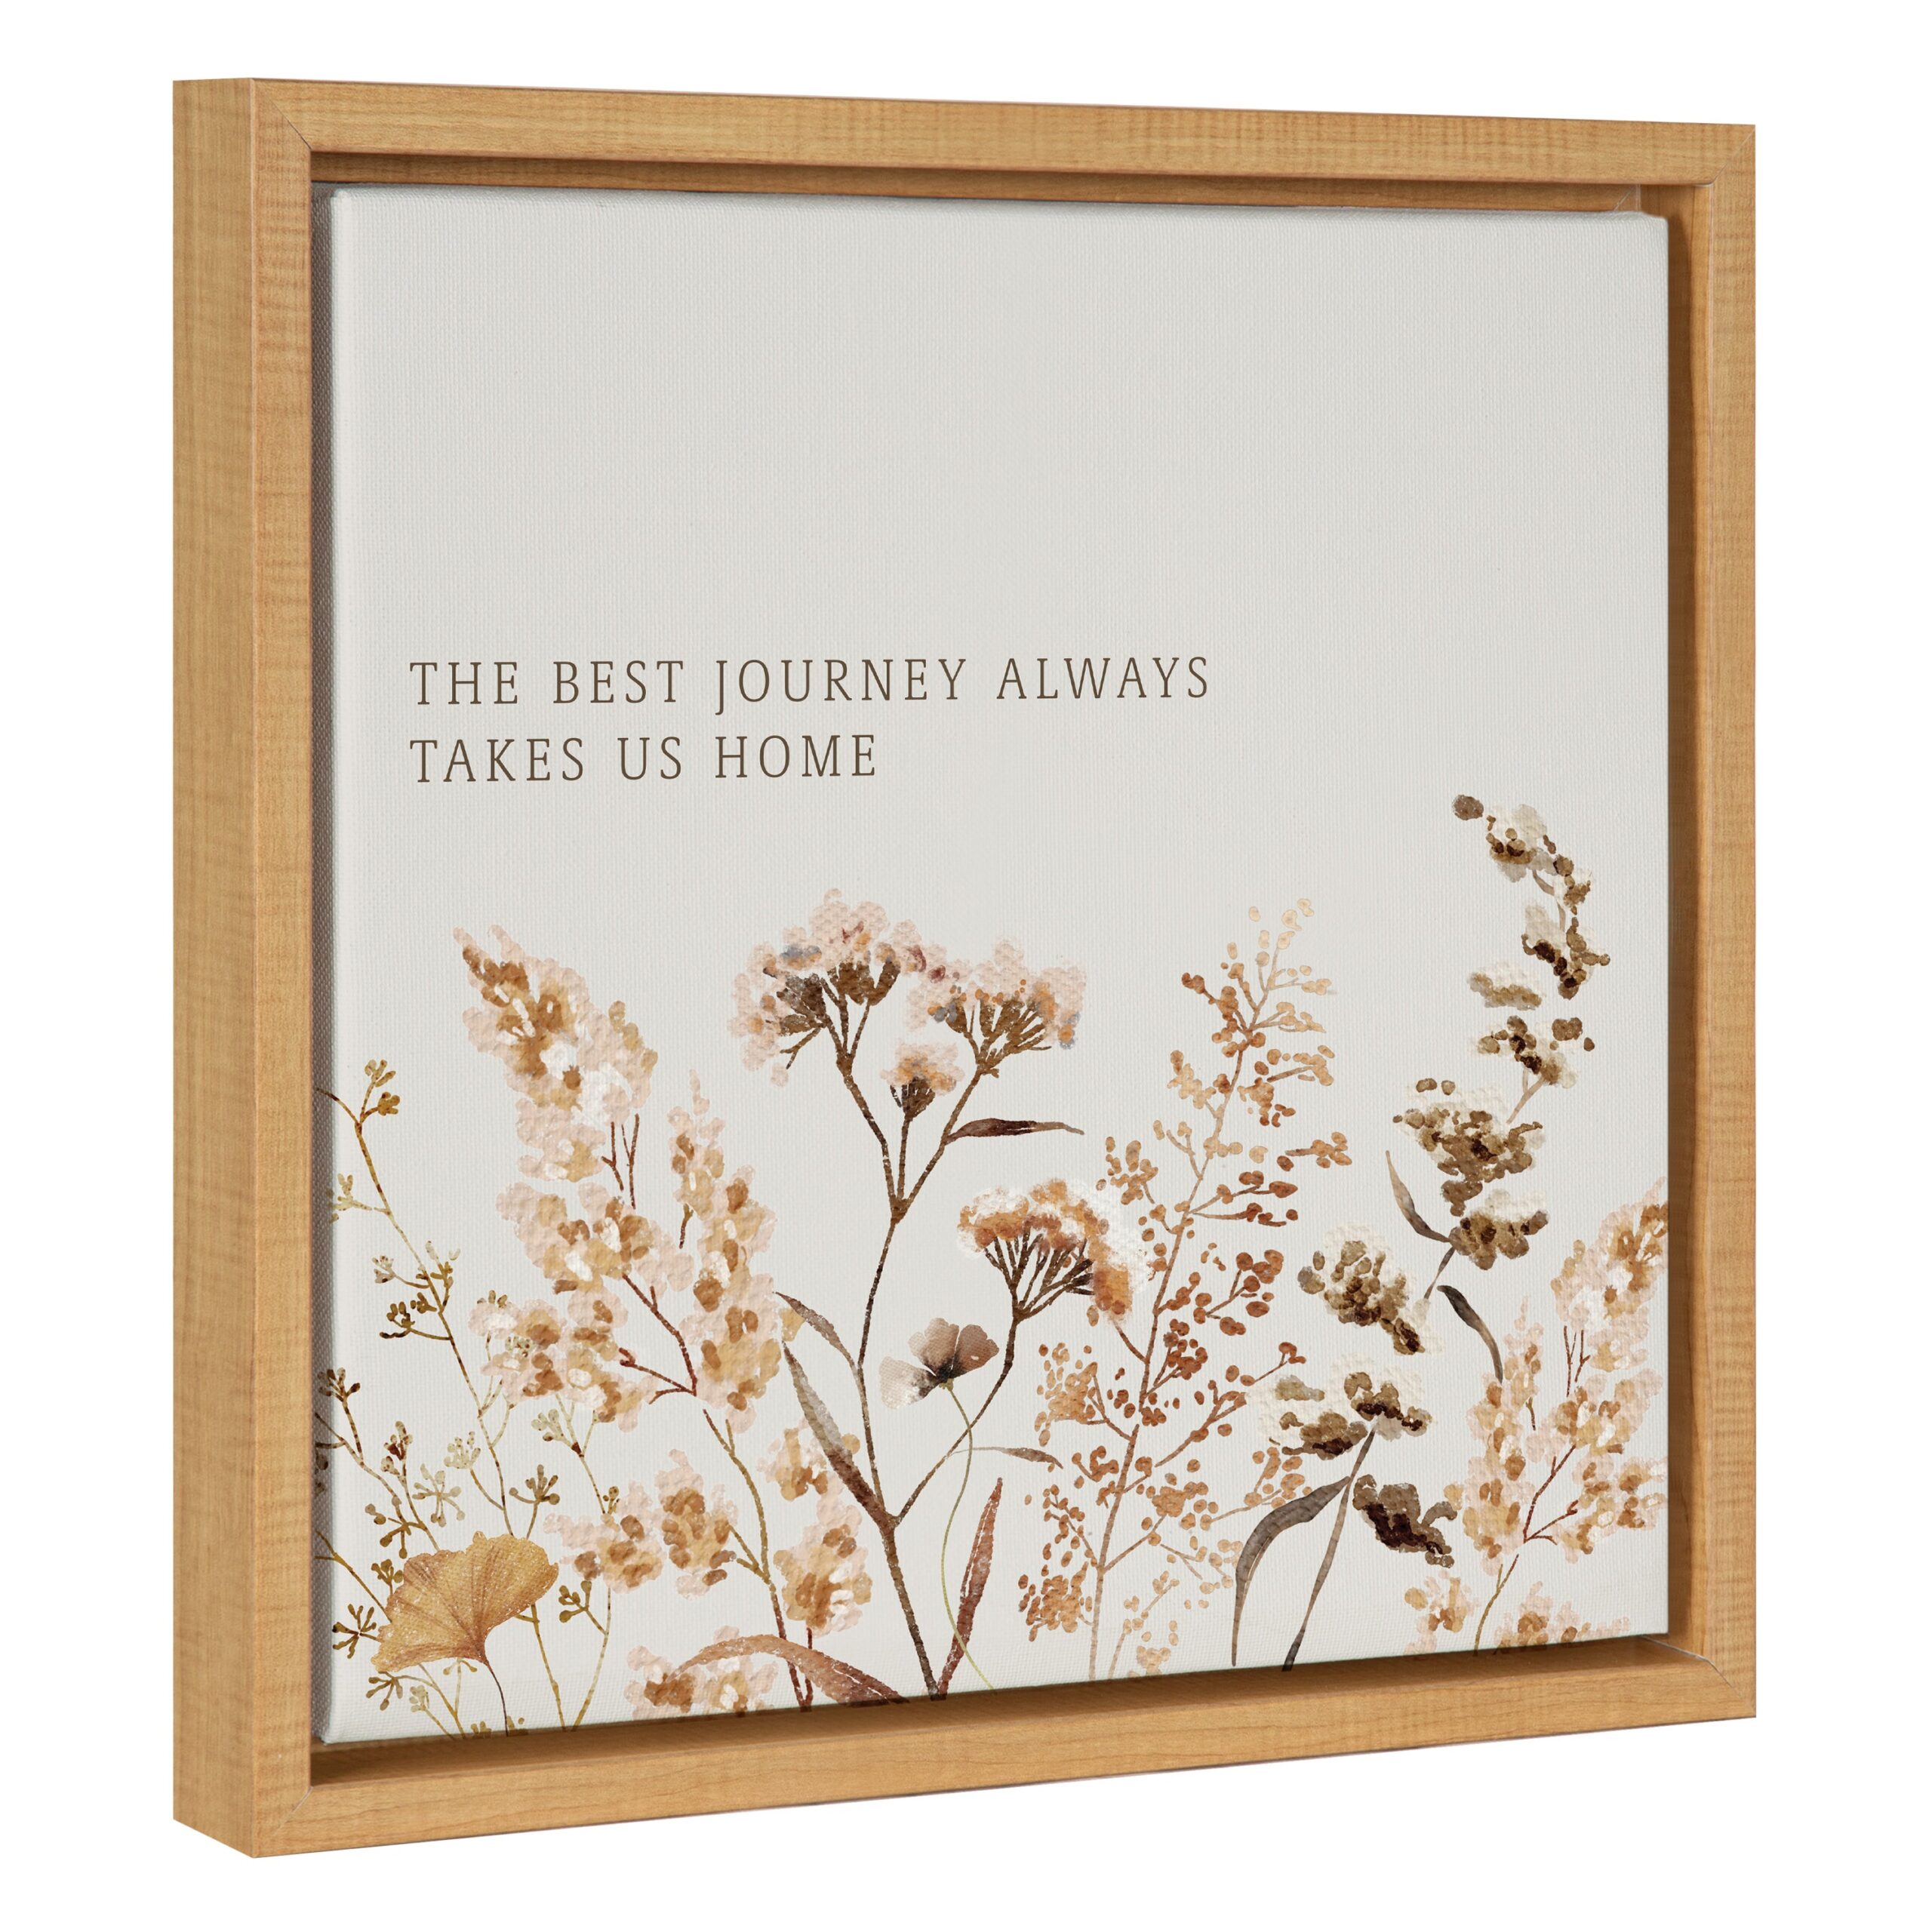 The Best Journey Always Takes Us Home / 14x14 Framed Canvas